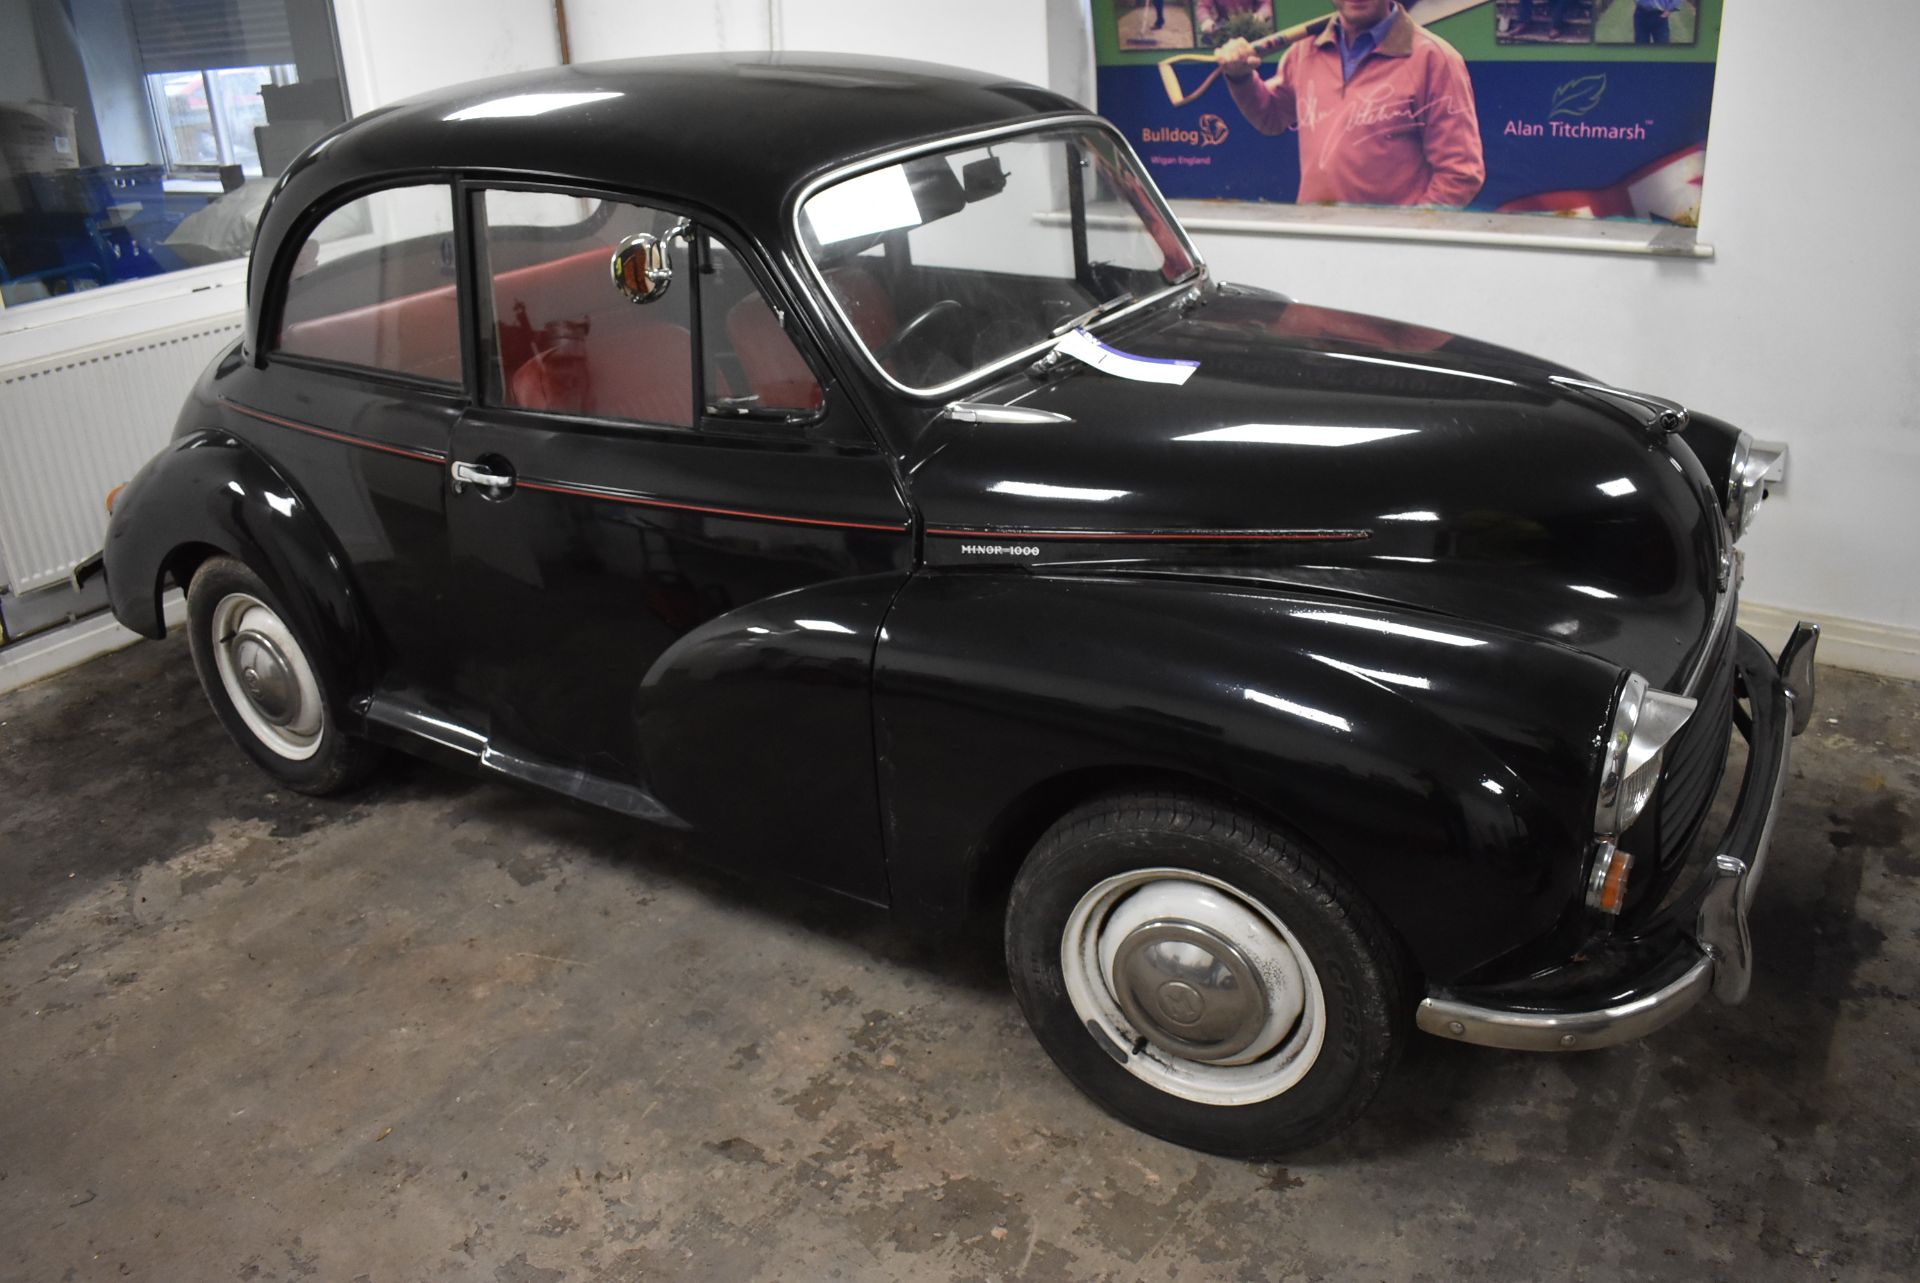 Morris MINOR 1000 TWO DOOR CLASSIC SALOON, registration no. WHP 661J, date first registered 23/03/